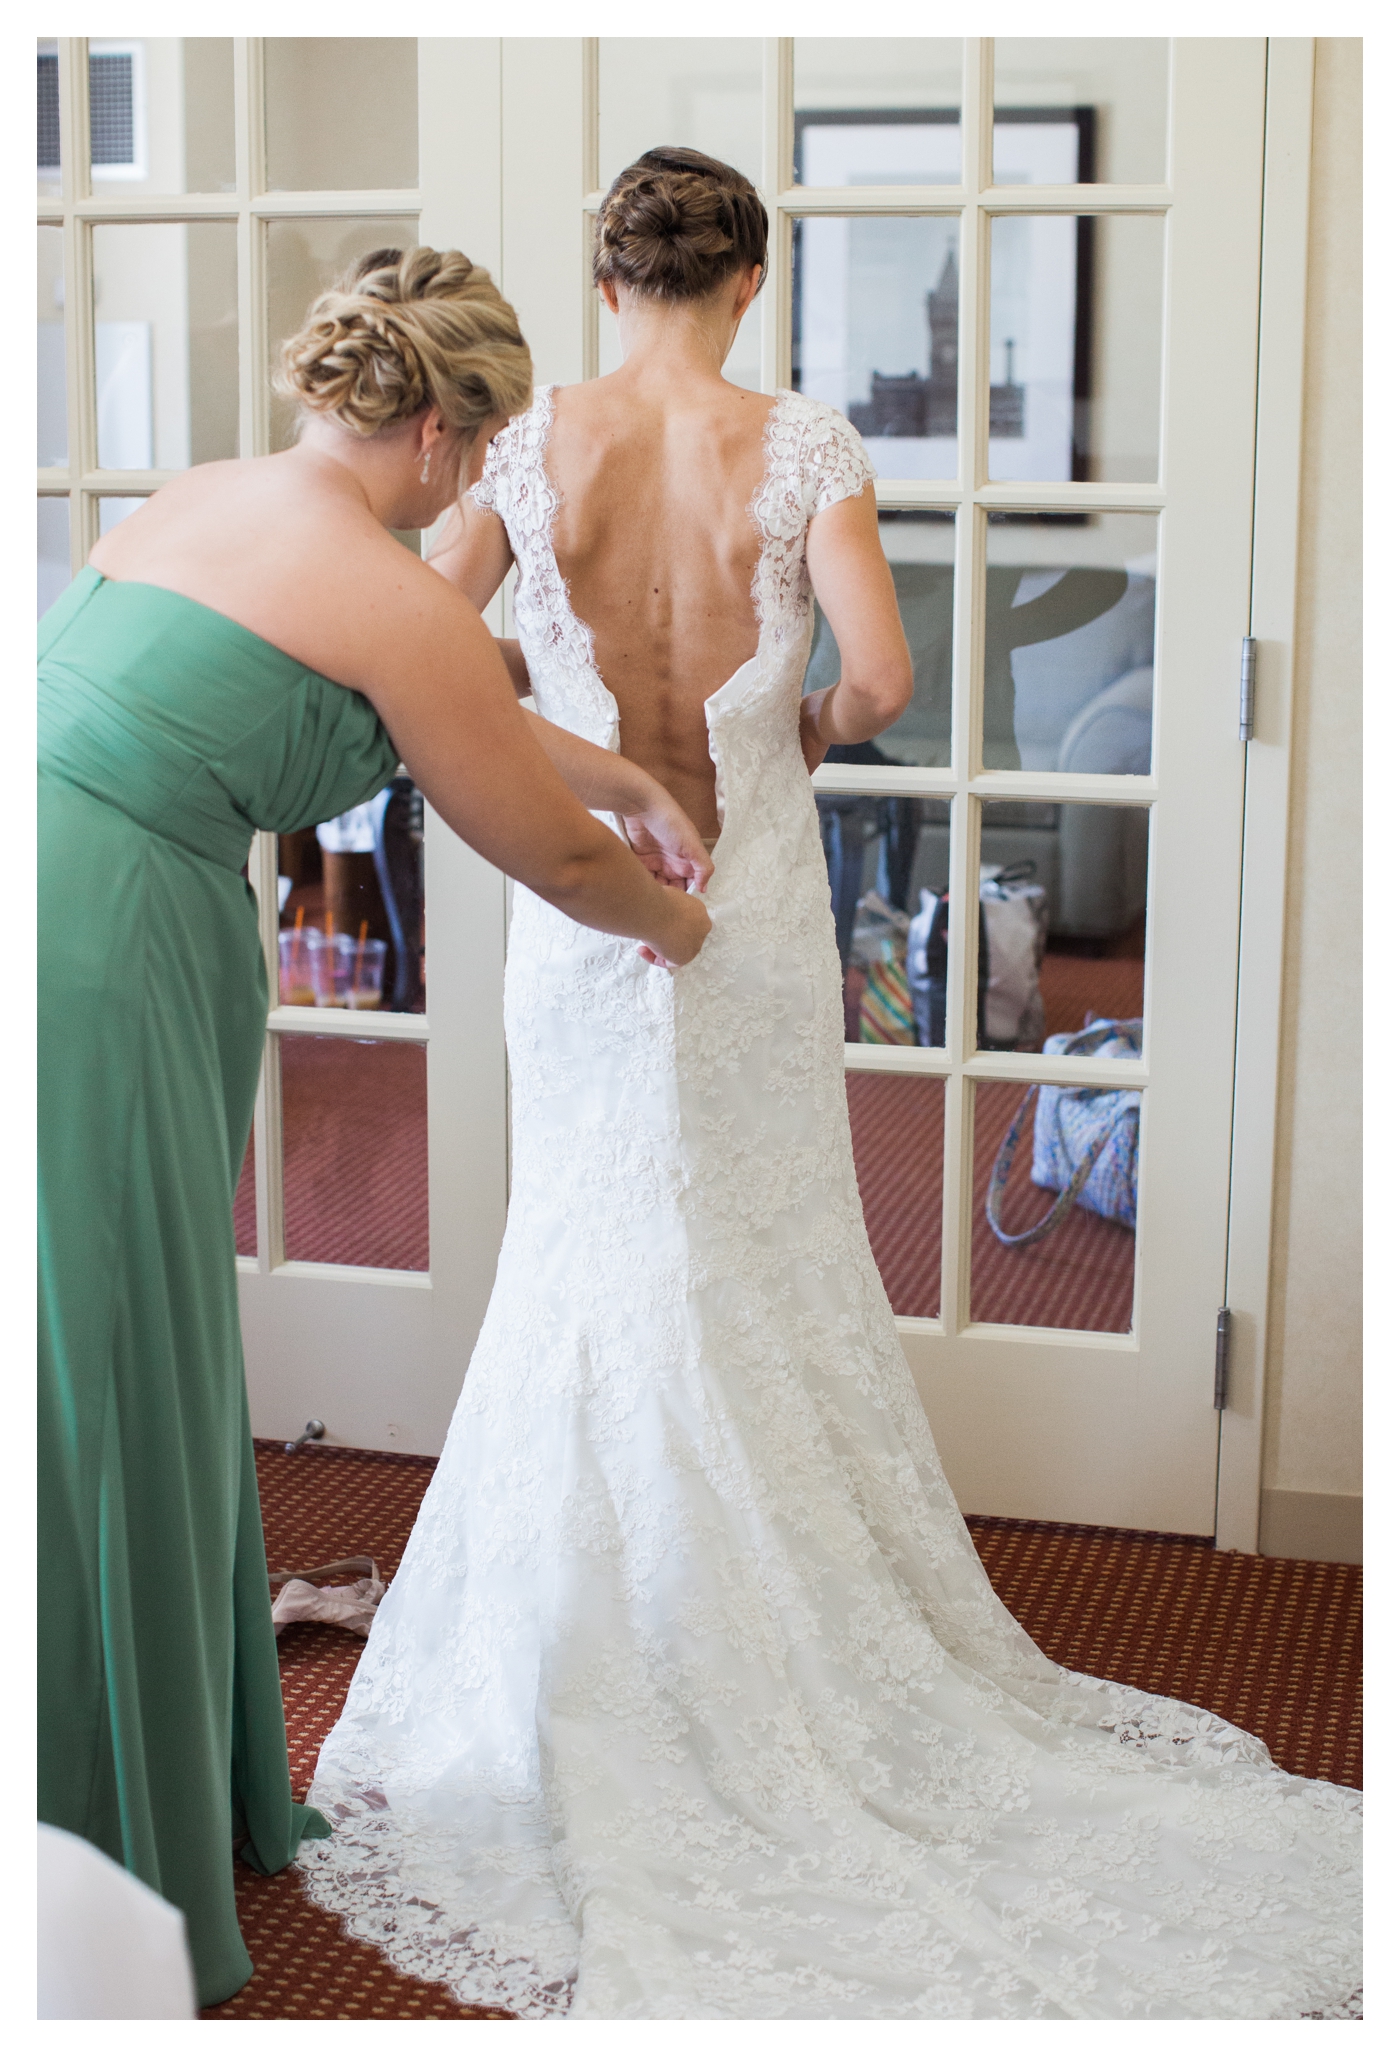 5 Reasons Why You Should Have Getting Ready Coverage The Day of Your Wedding - Michele Ashley Photography